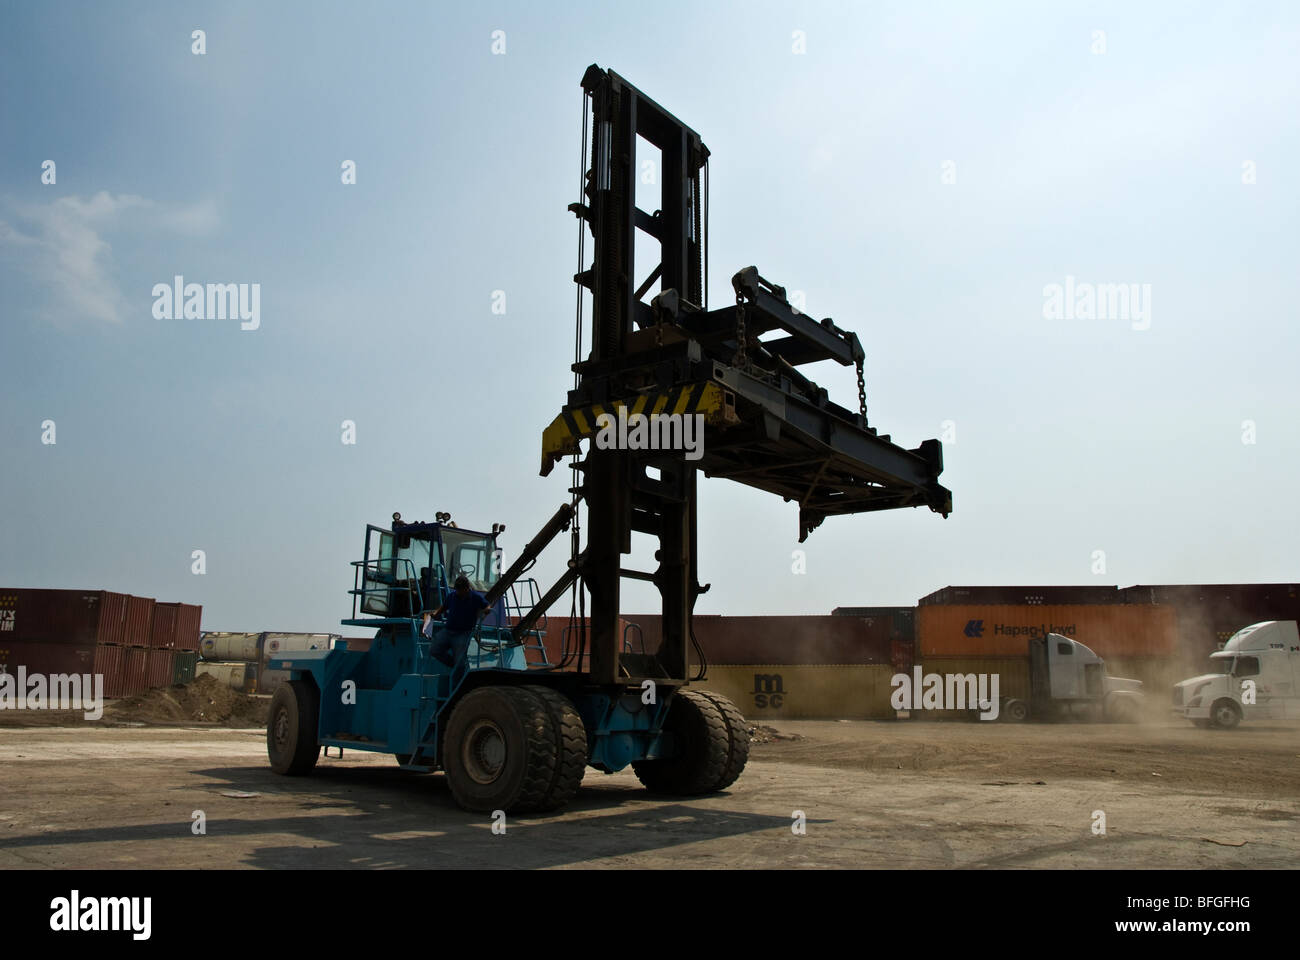 a crane for lifting cargo containers Stock Photo